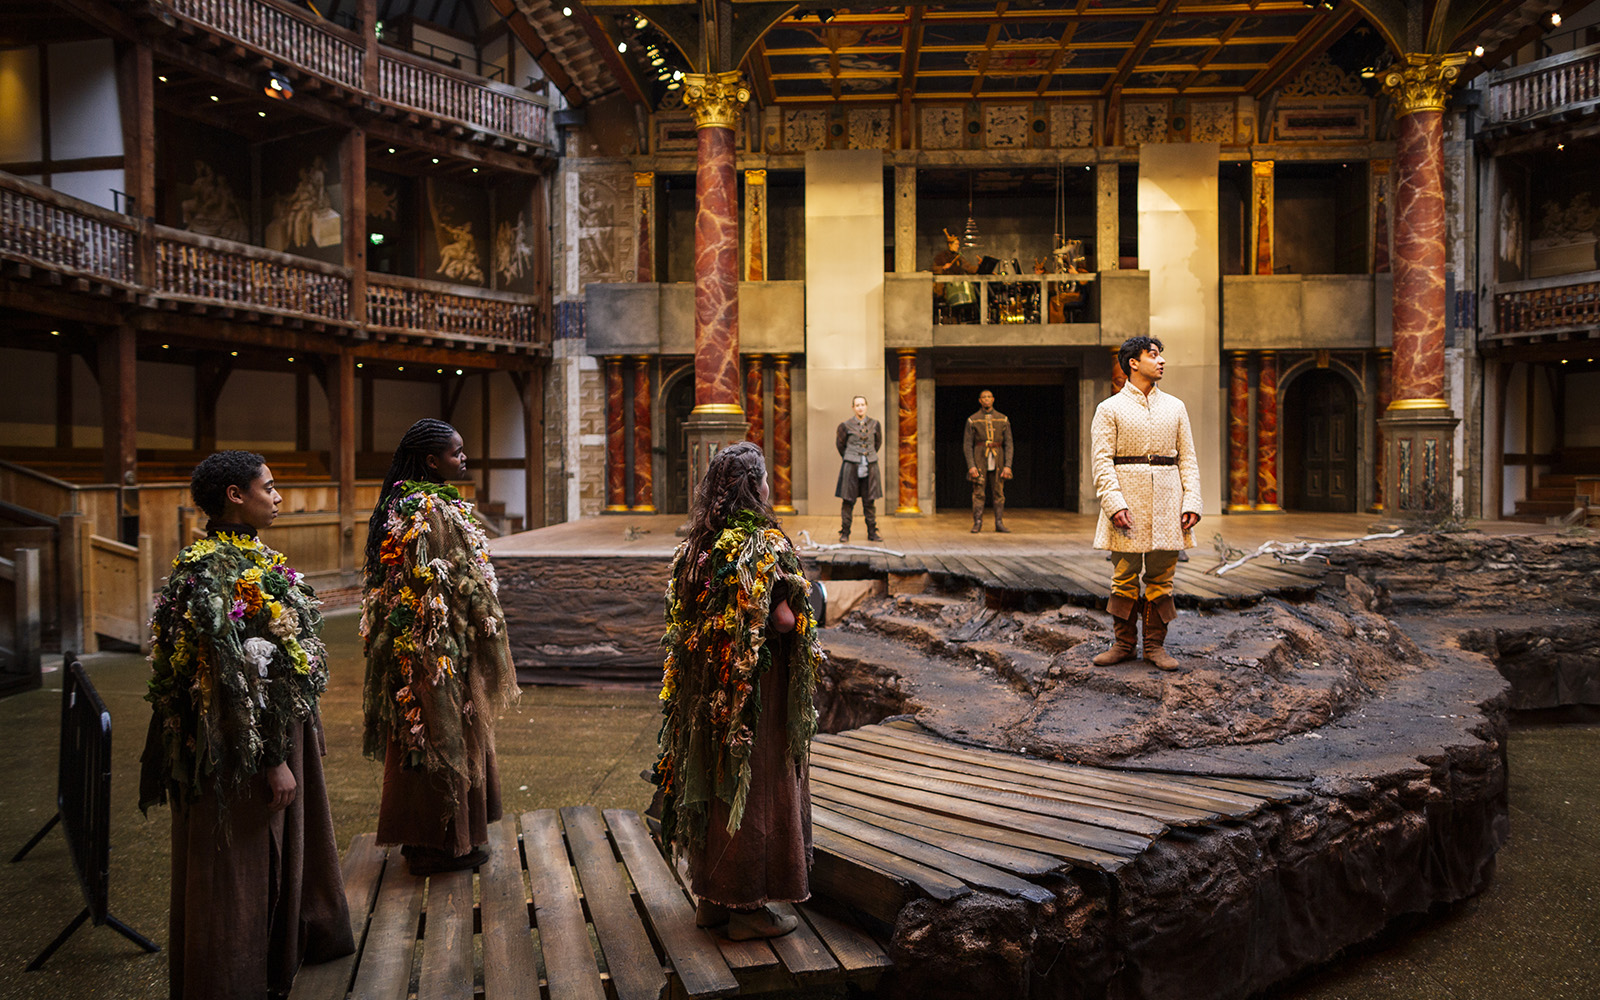 Three actors stand to the left of the stage adorned with flowers. Another actor stands in front of them dressed in a white tunic.